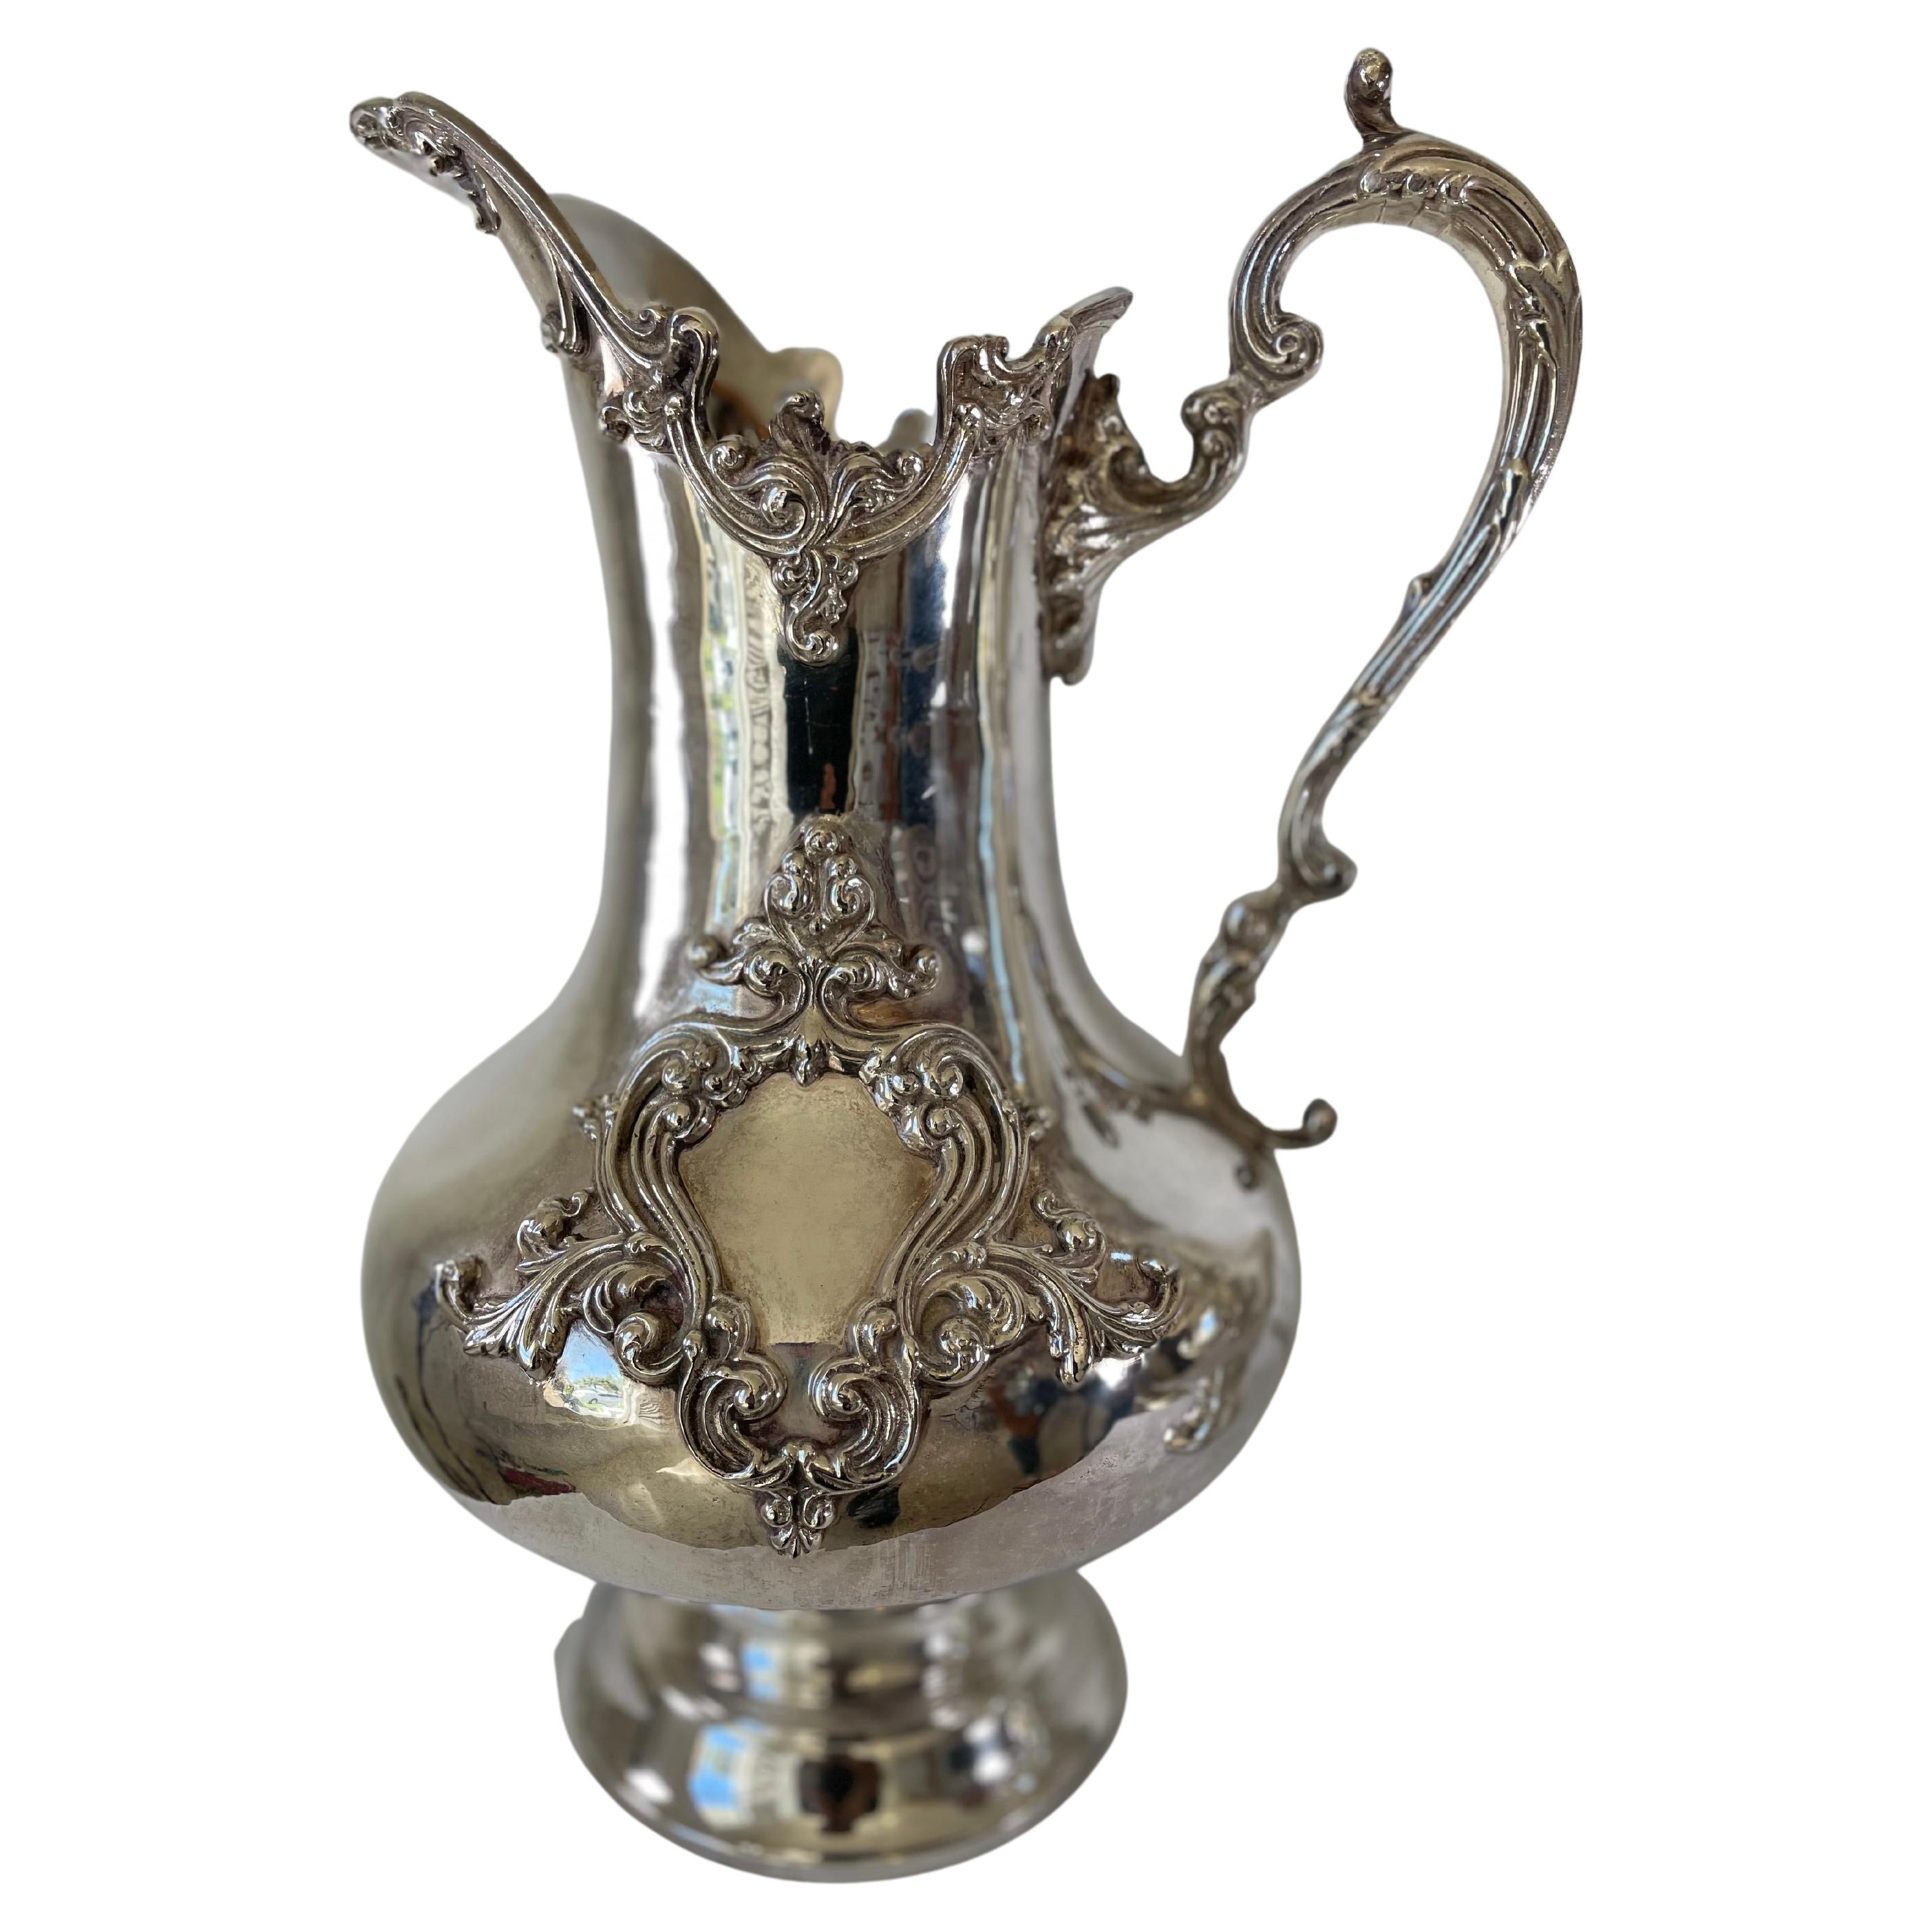 Pair of English pitchers signed Royal Castle Sheffield EP, on the underside. Pitchers in silver metal of large sizes decorated with foliage, on the handle, on the neck and a central decoration.